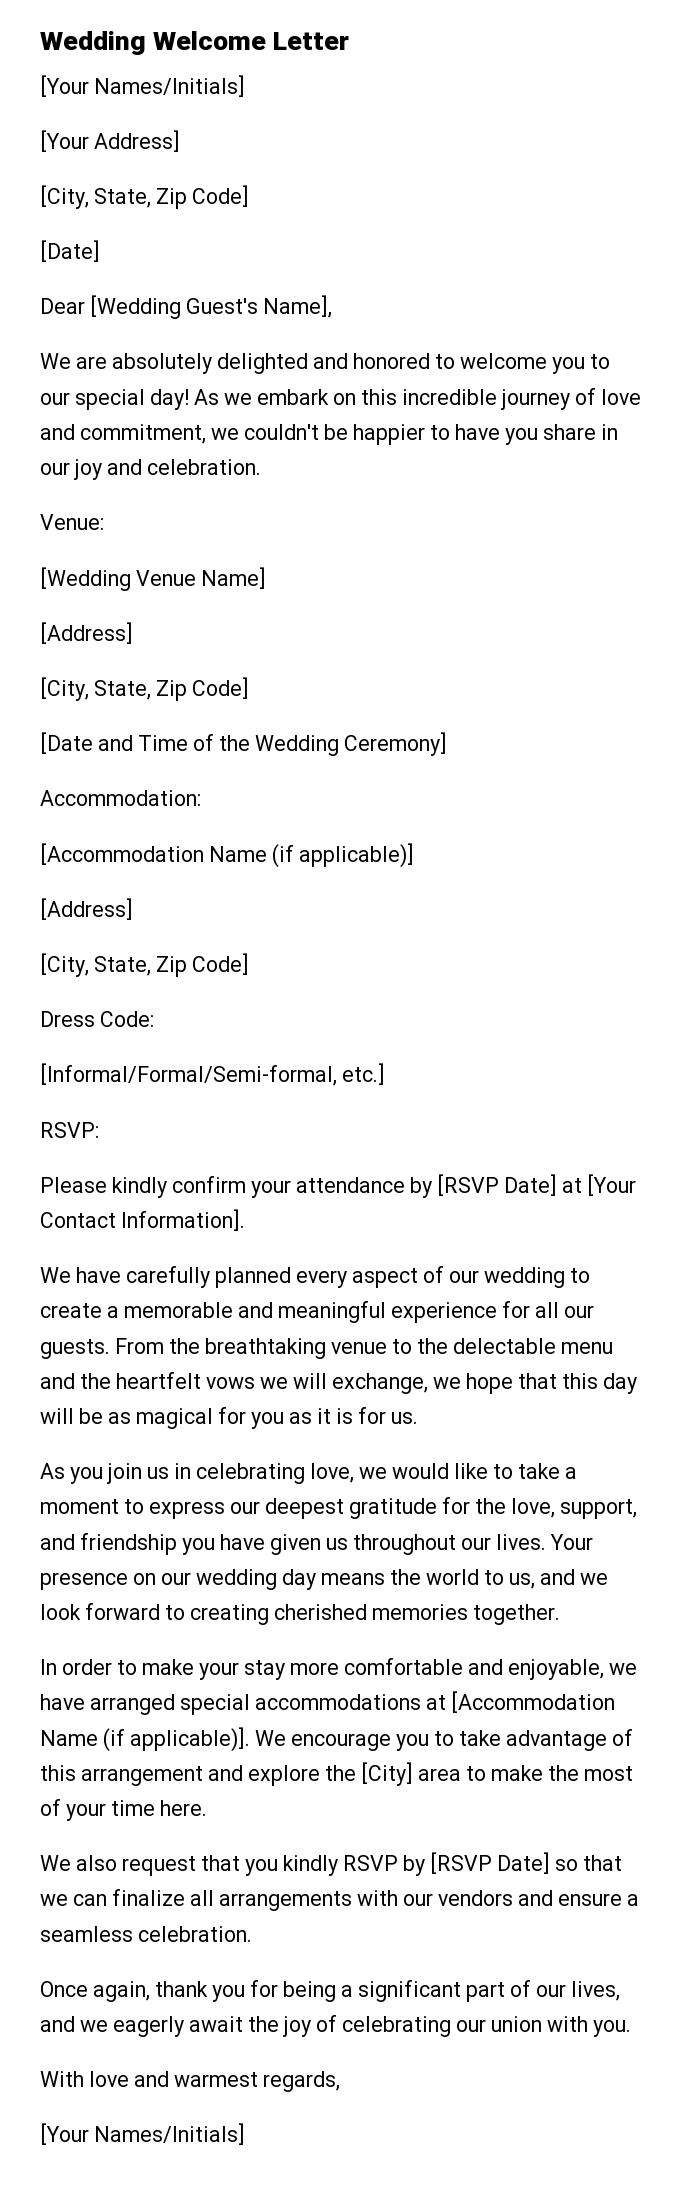 Wedding Welcome Letter